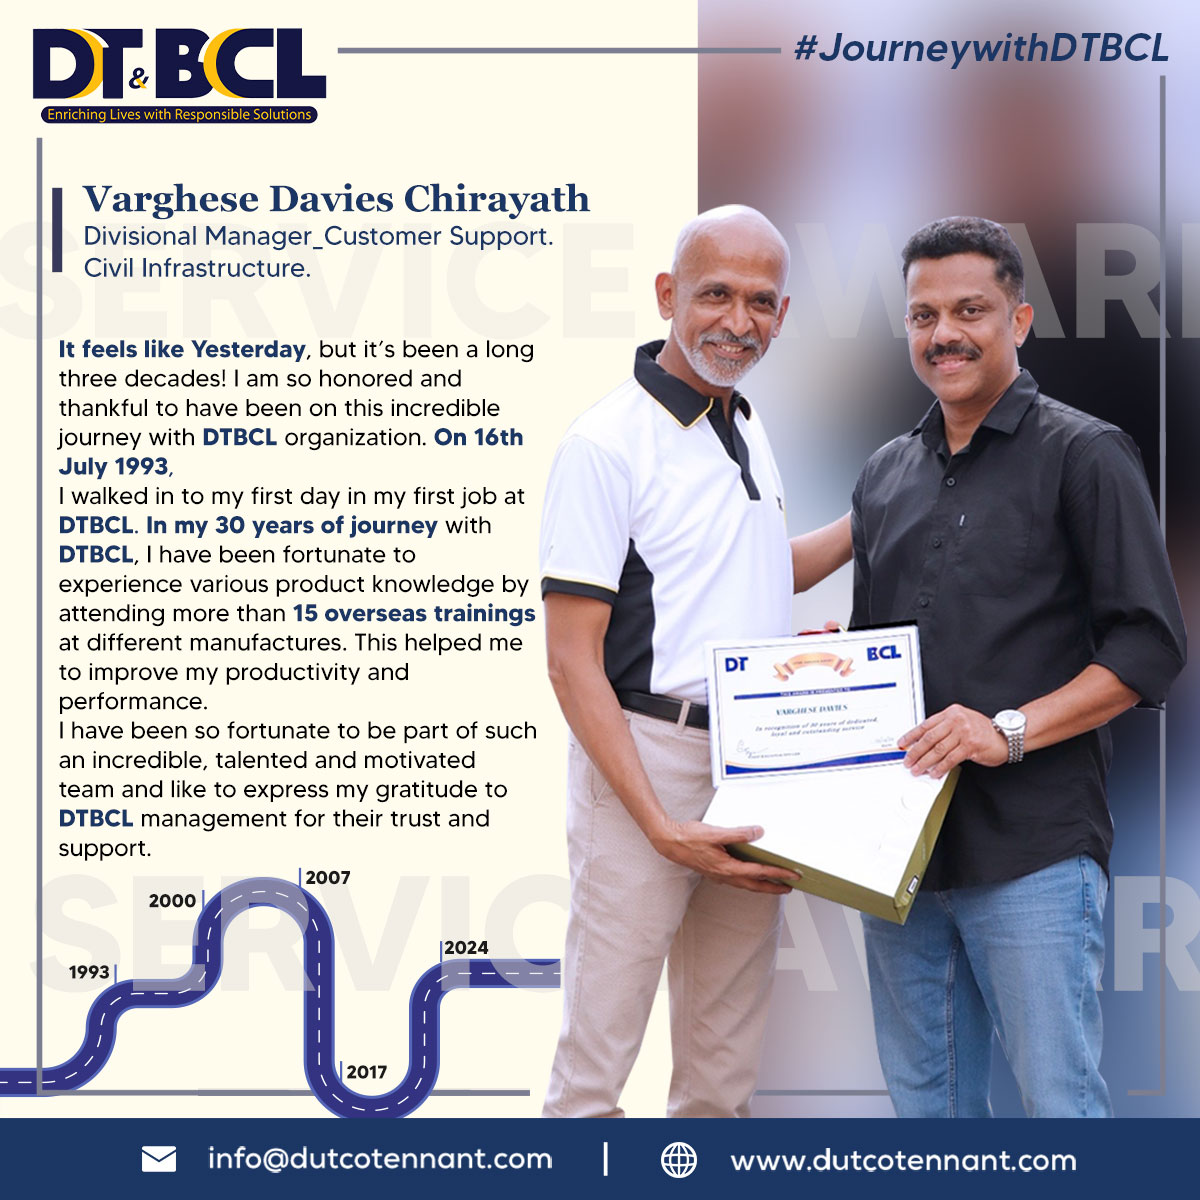 Congratulations VARGHESE on your remarkable 30-year journey with us !!

#employeeachievement #employeeappreciation #celebratingexcellence #employeerecognition #workculture #DutcoTennantLLC #DTBCL